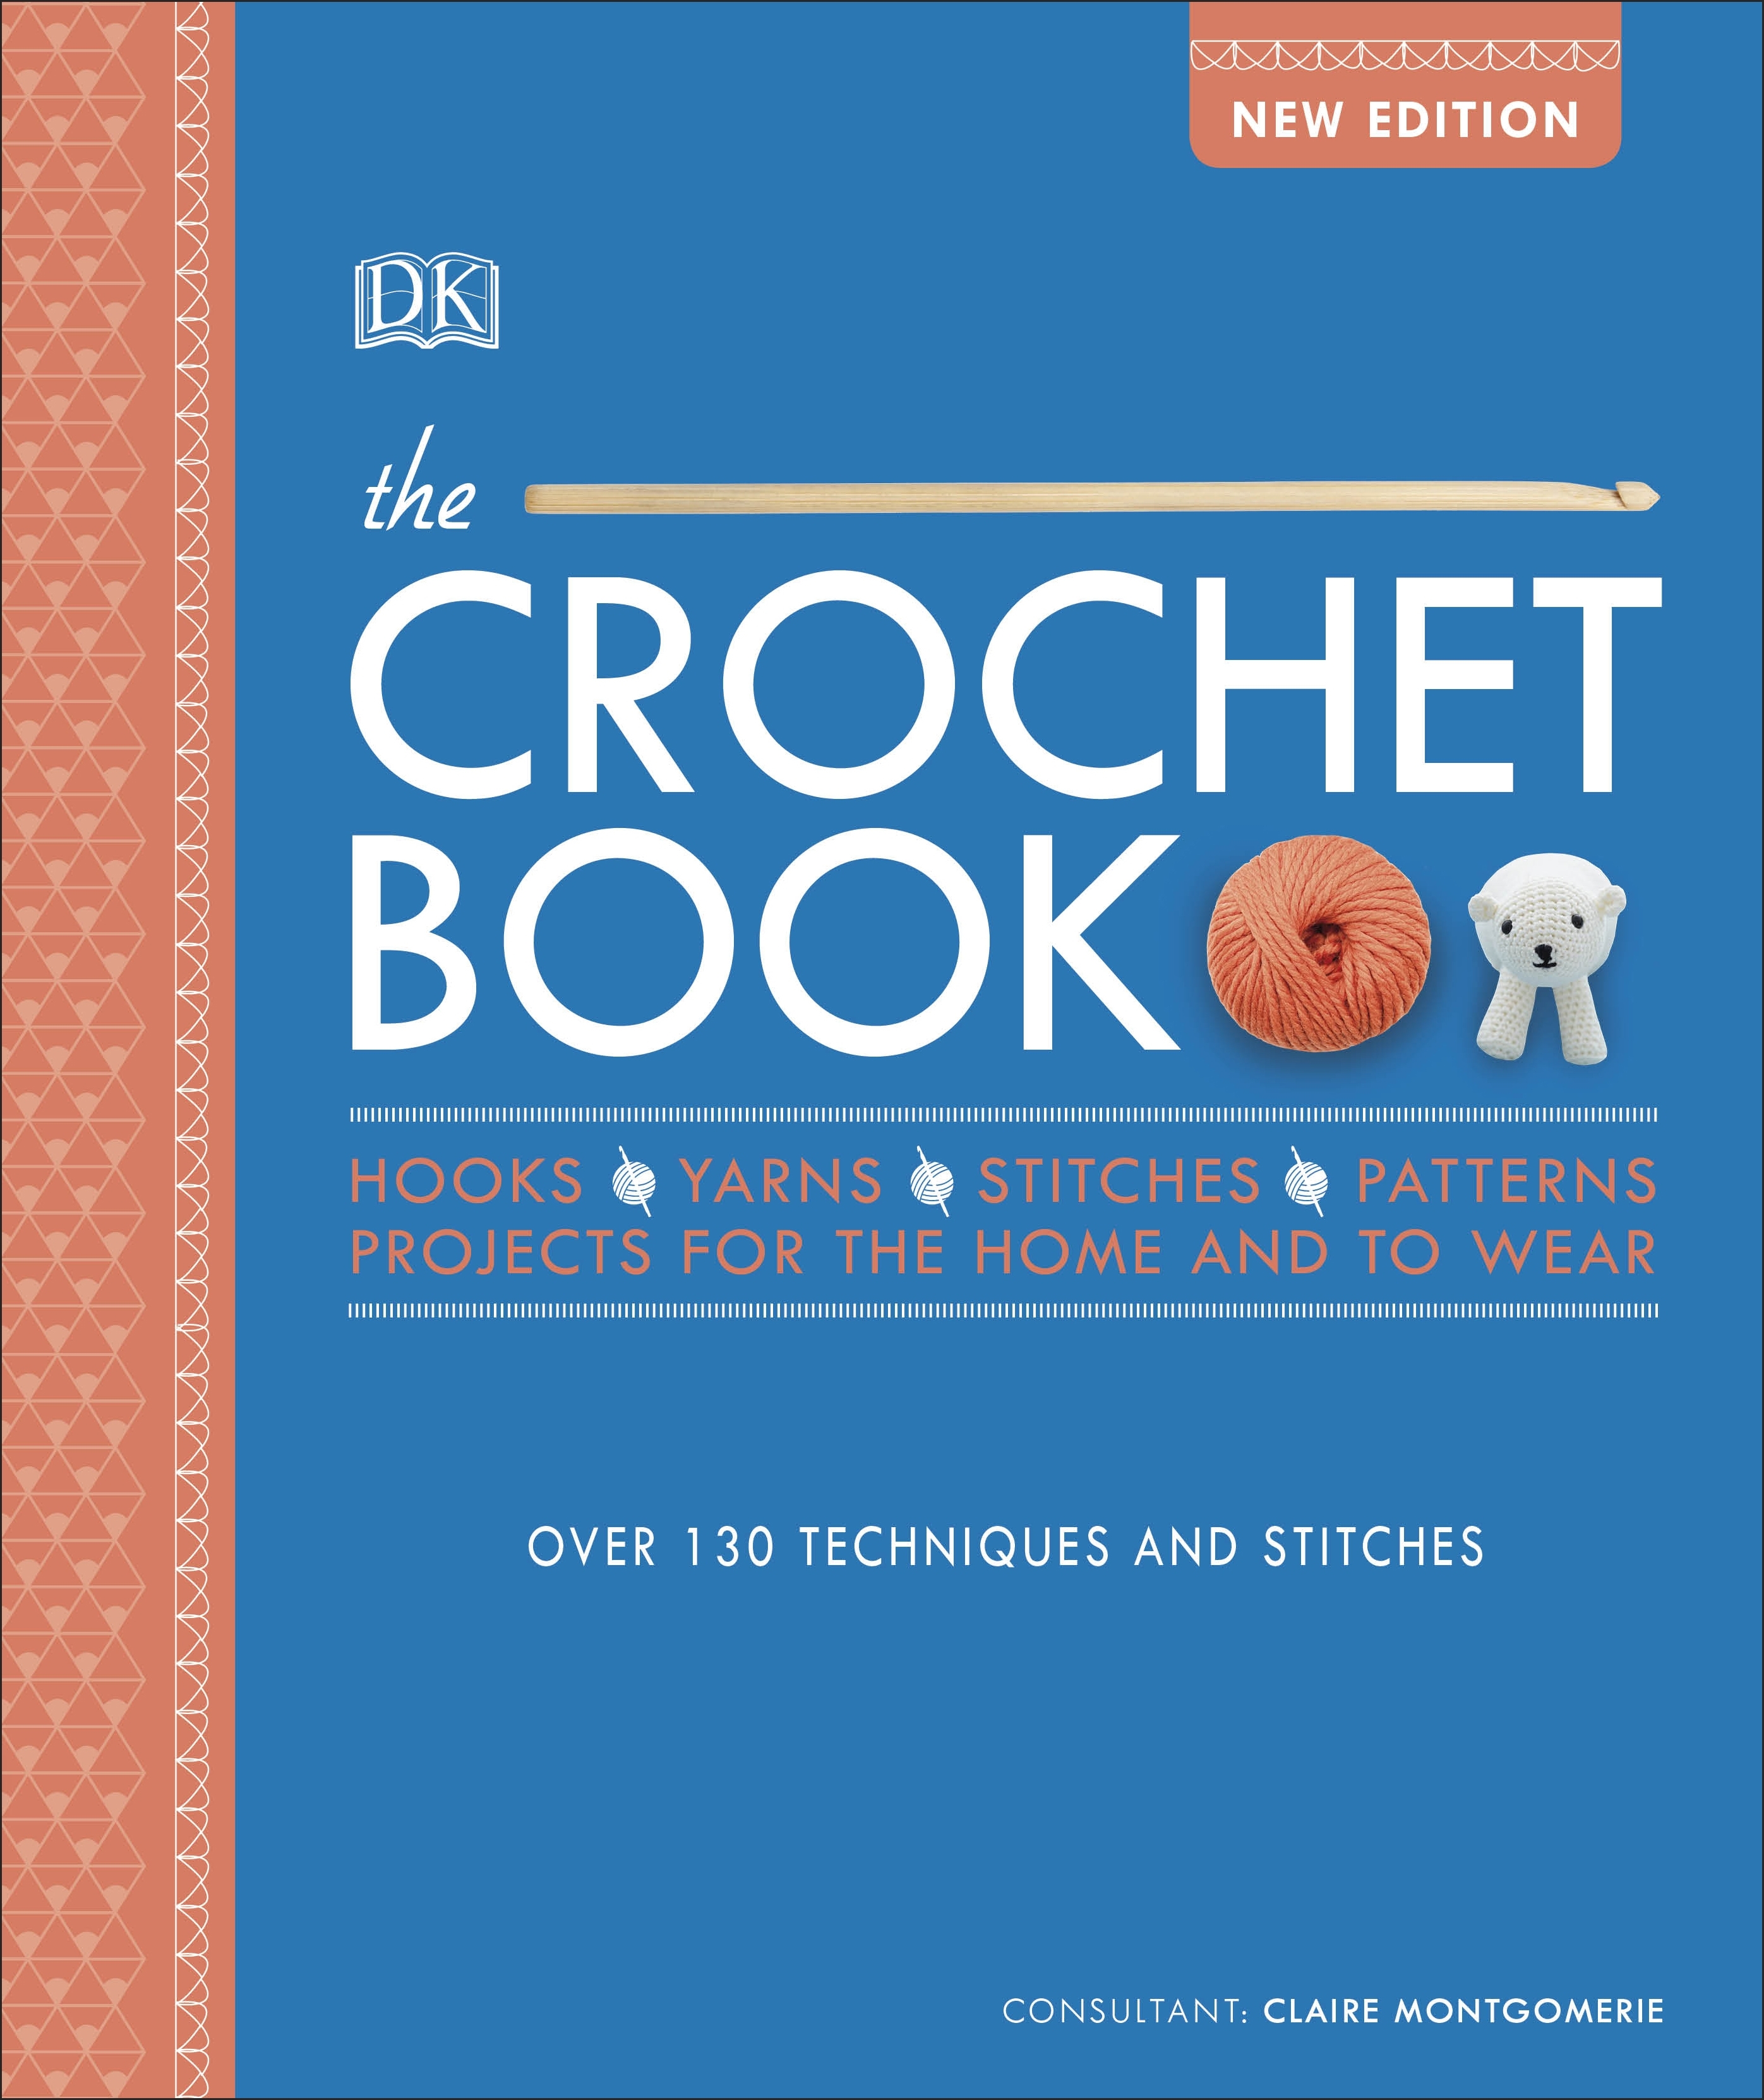 The Crochet Book by CLAIRE MONTGOMERIE - Penguin Books New Zealand